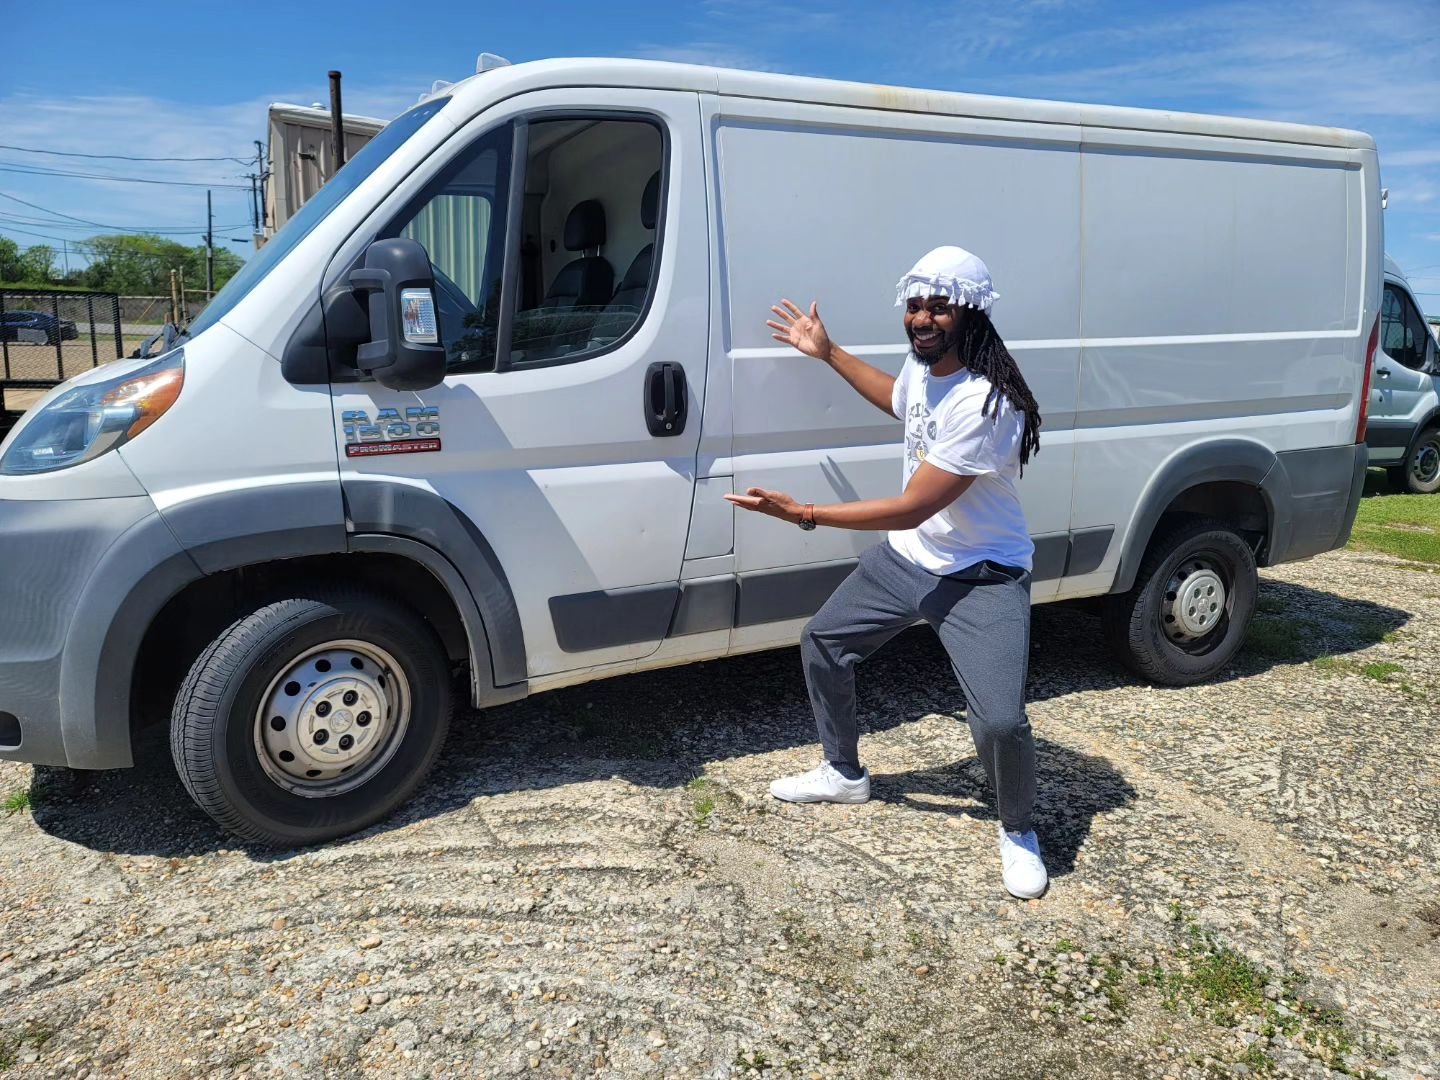 Gratitude knows no bounds! 🙏 Huge thanks to Wiggins Incorporated nationwide electrical and network cabling for their generous donation of our new van. With their support, Kidz N Cameras is embarking on a journey to empower young minds across Northwe